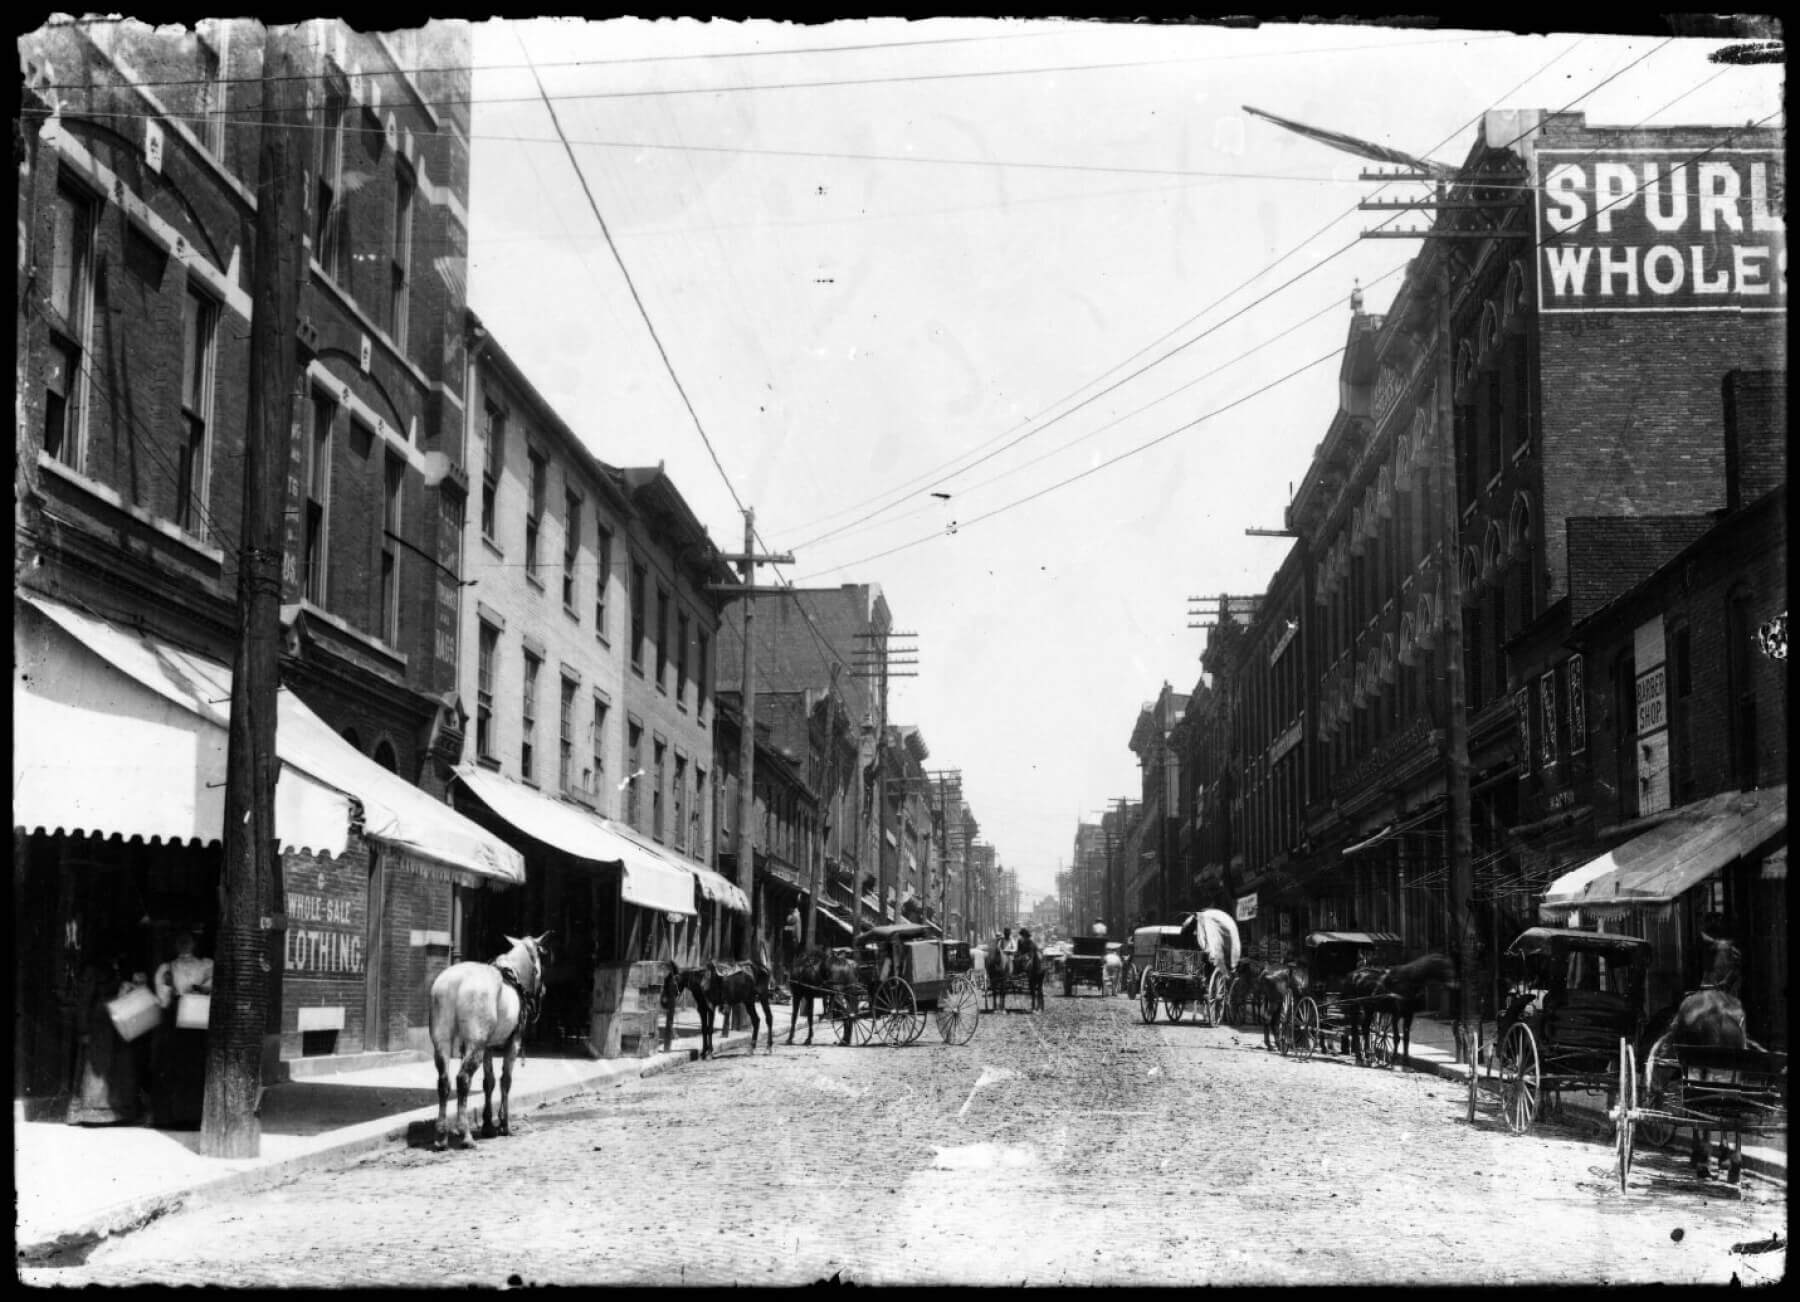 Historic images from Nashville